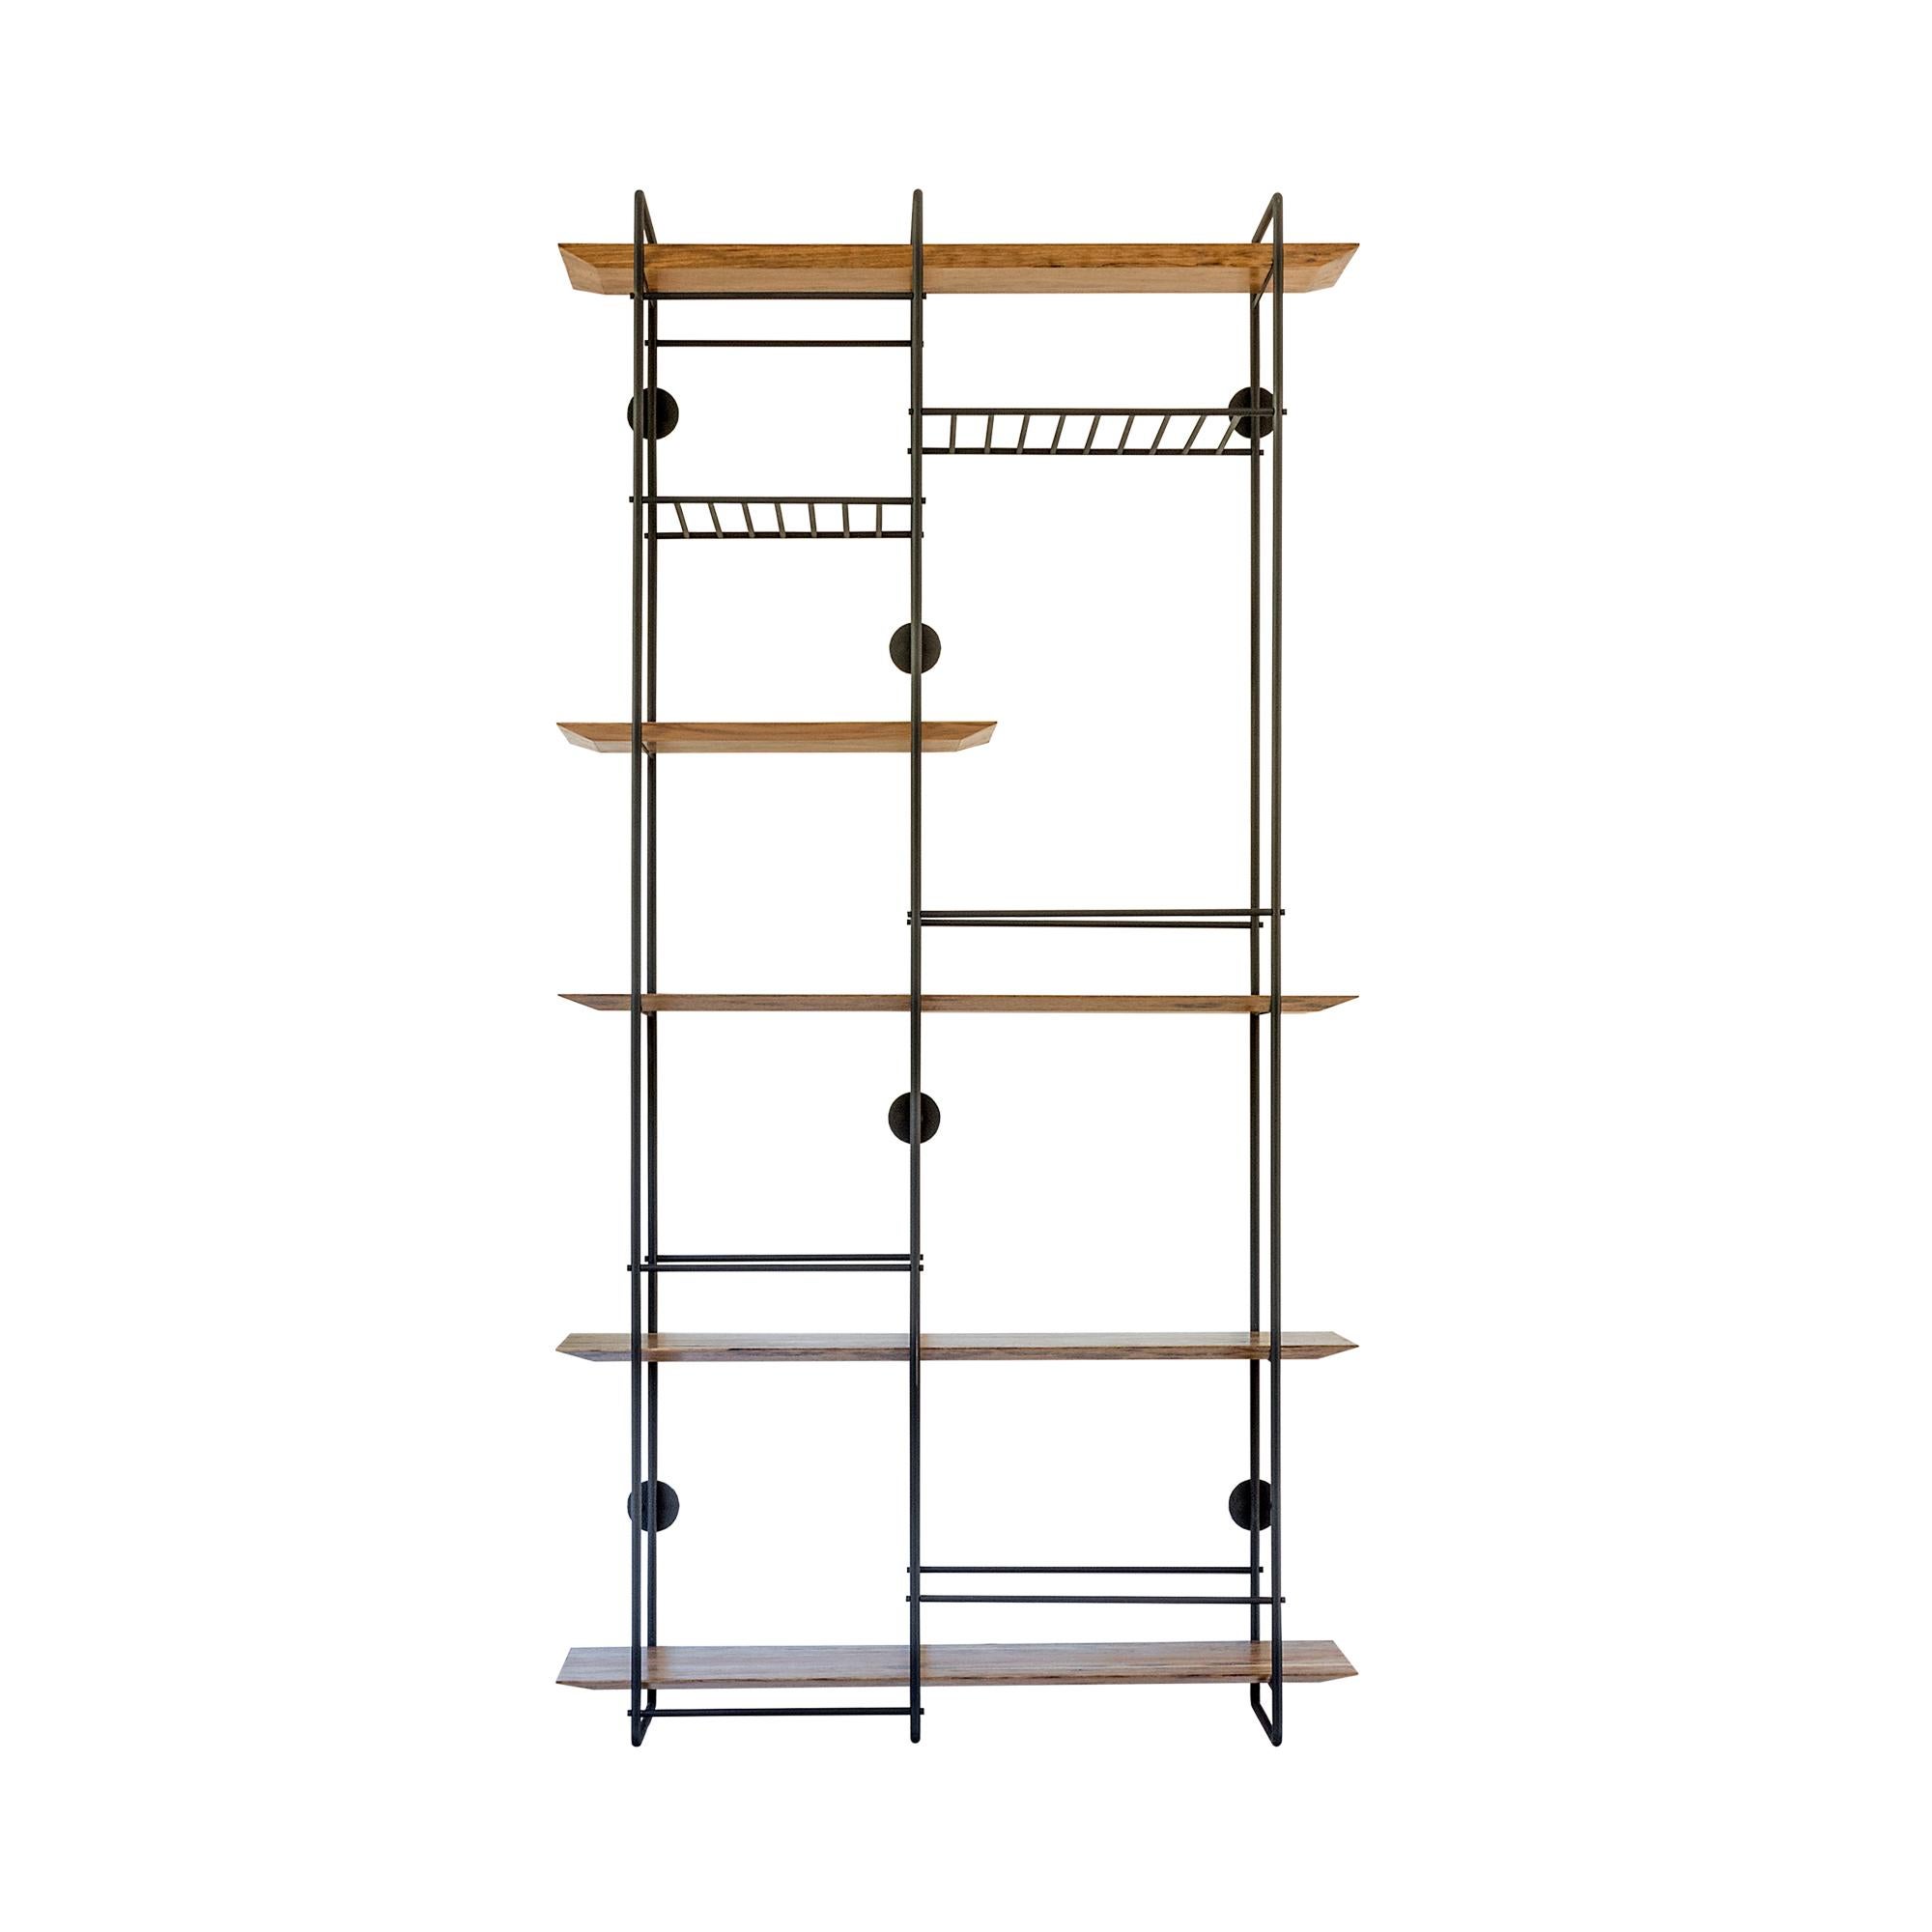 "Dots 5 grid" Minimalist Floating Shelf Unit in Stainless Steel and Hardwood For Sale